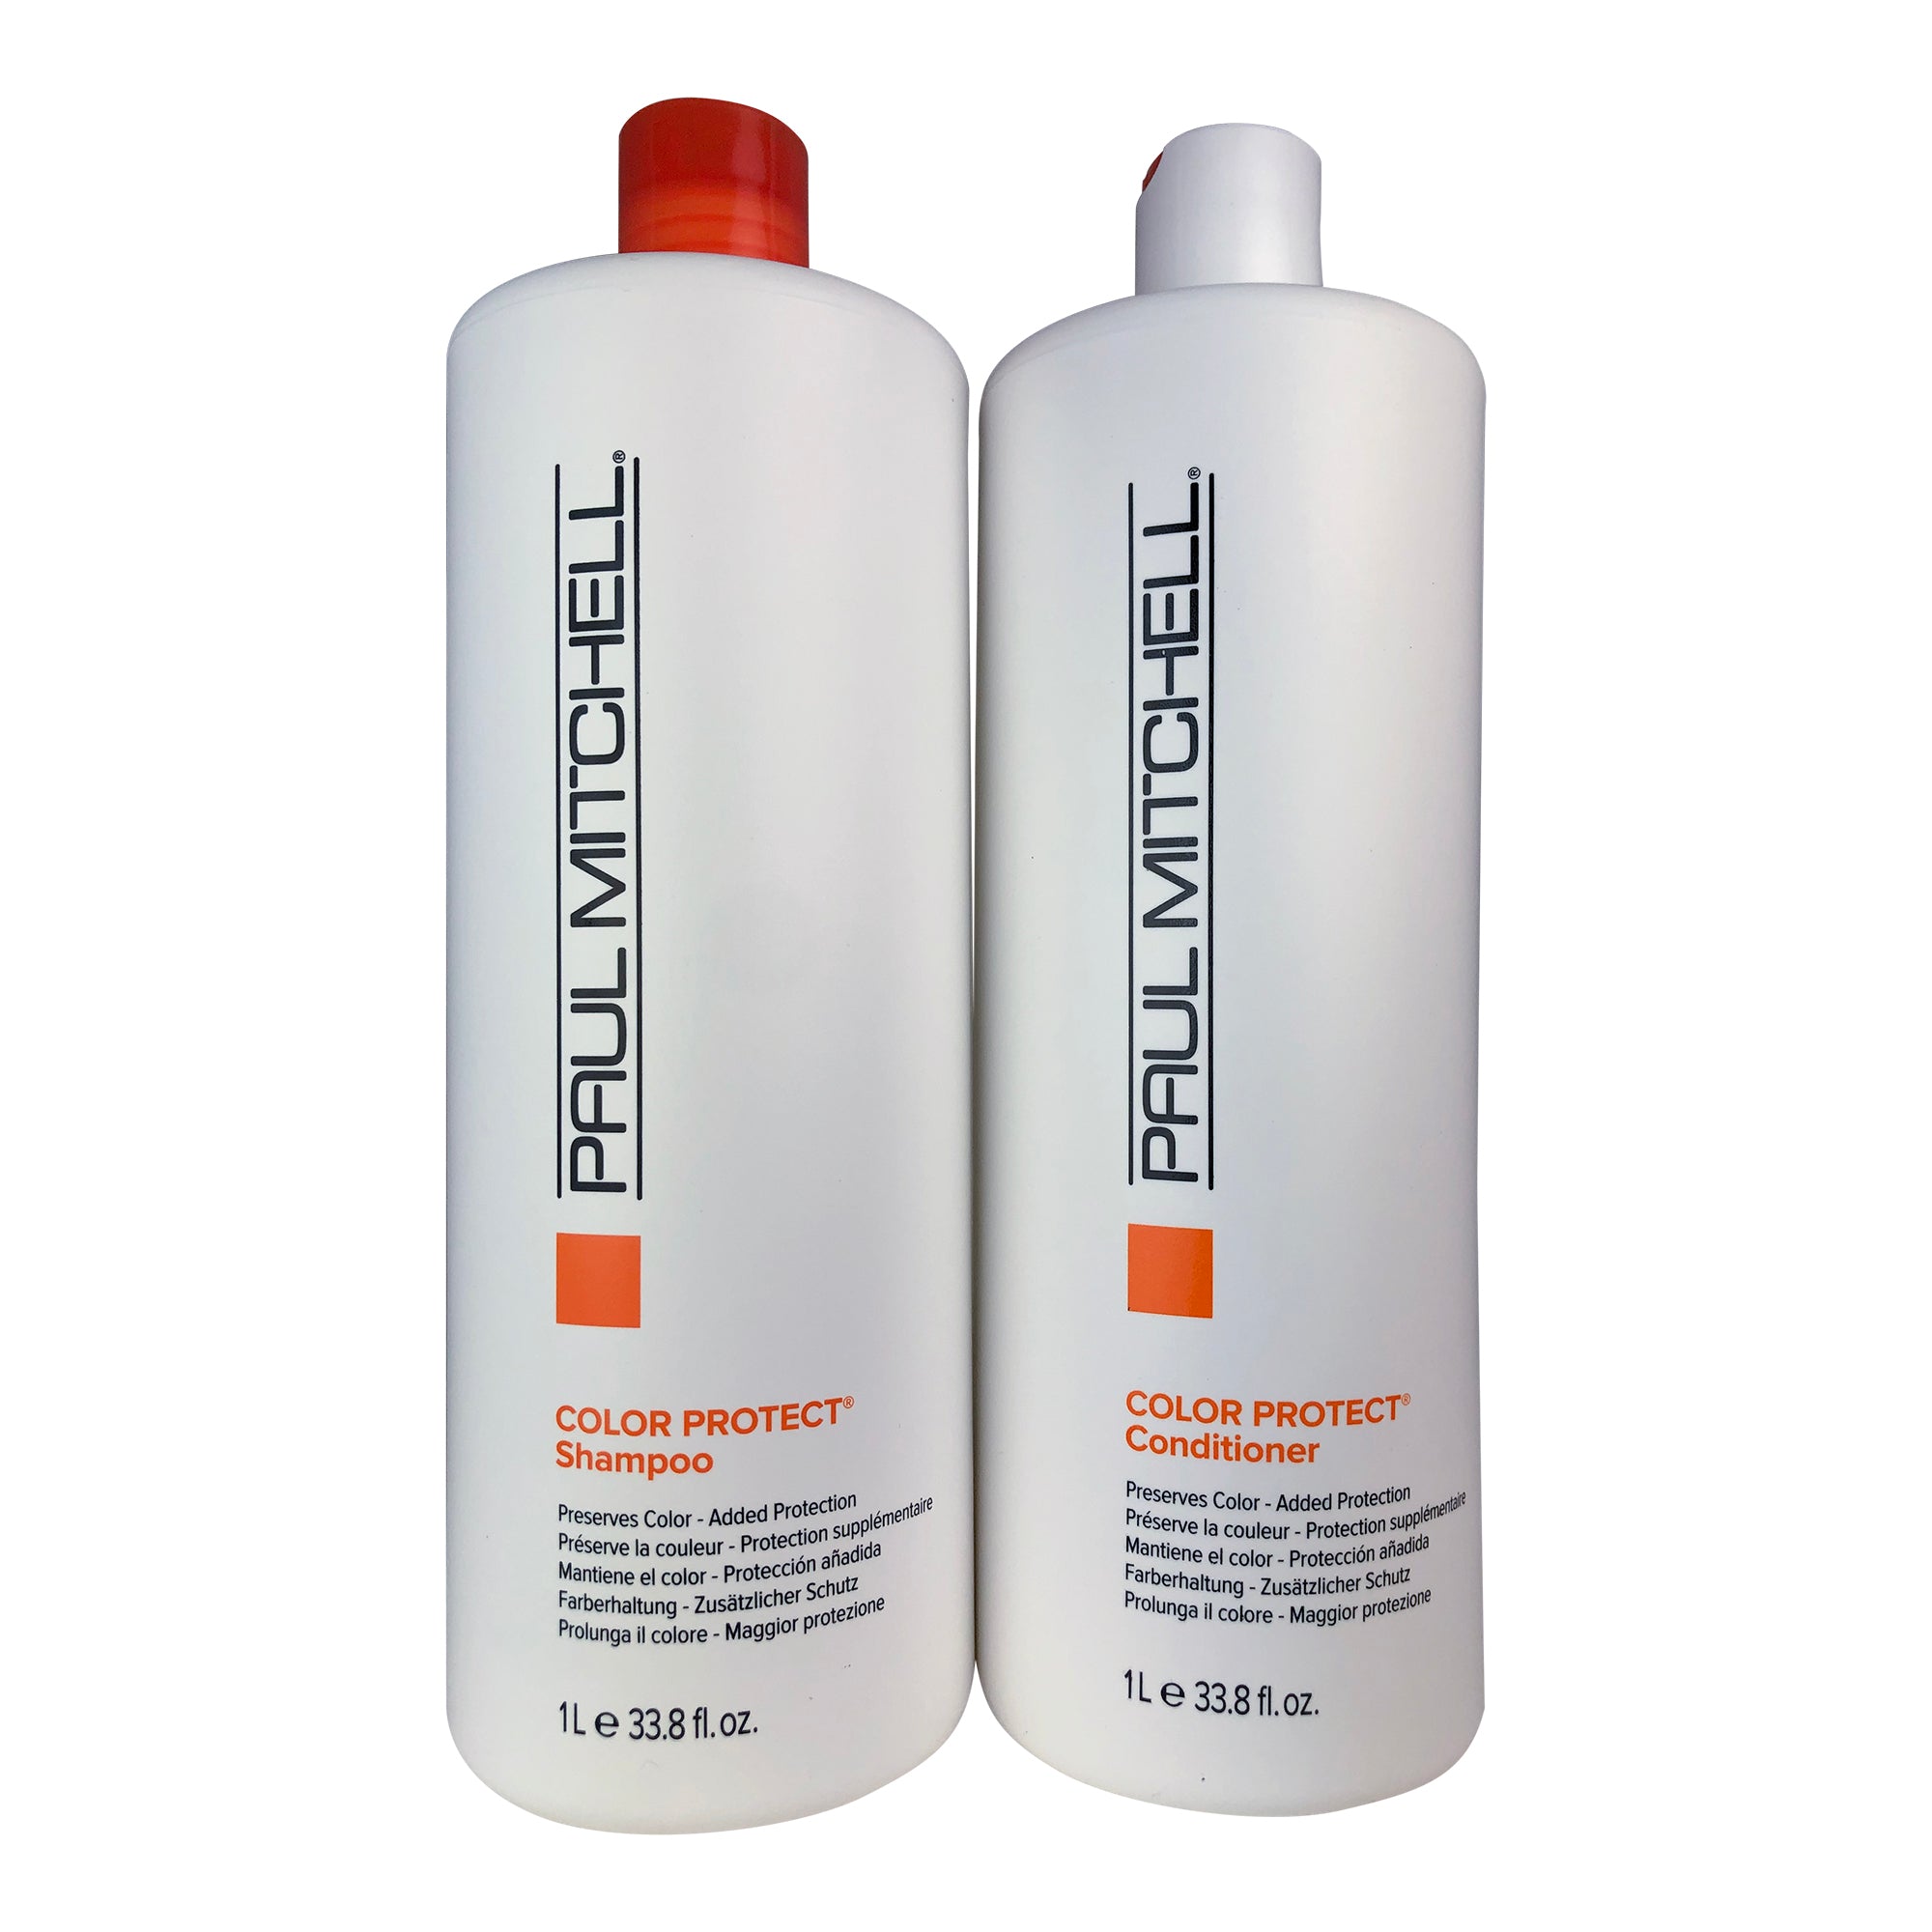 Paul Mitchell Color Protect Duo (Shampoo and Conditioner)